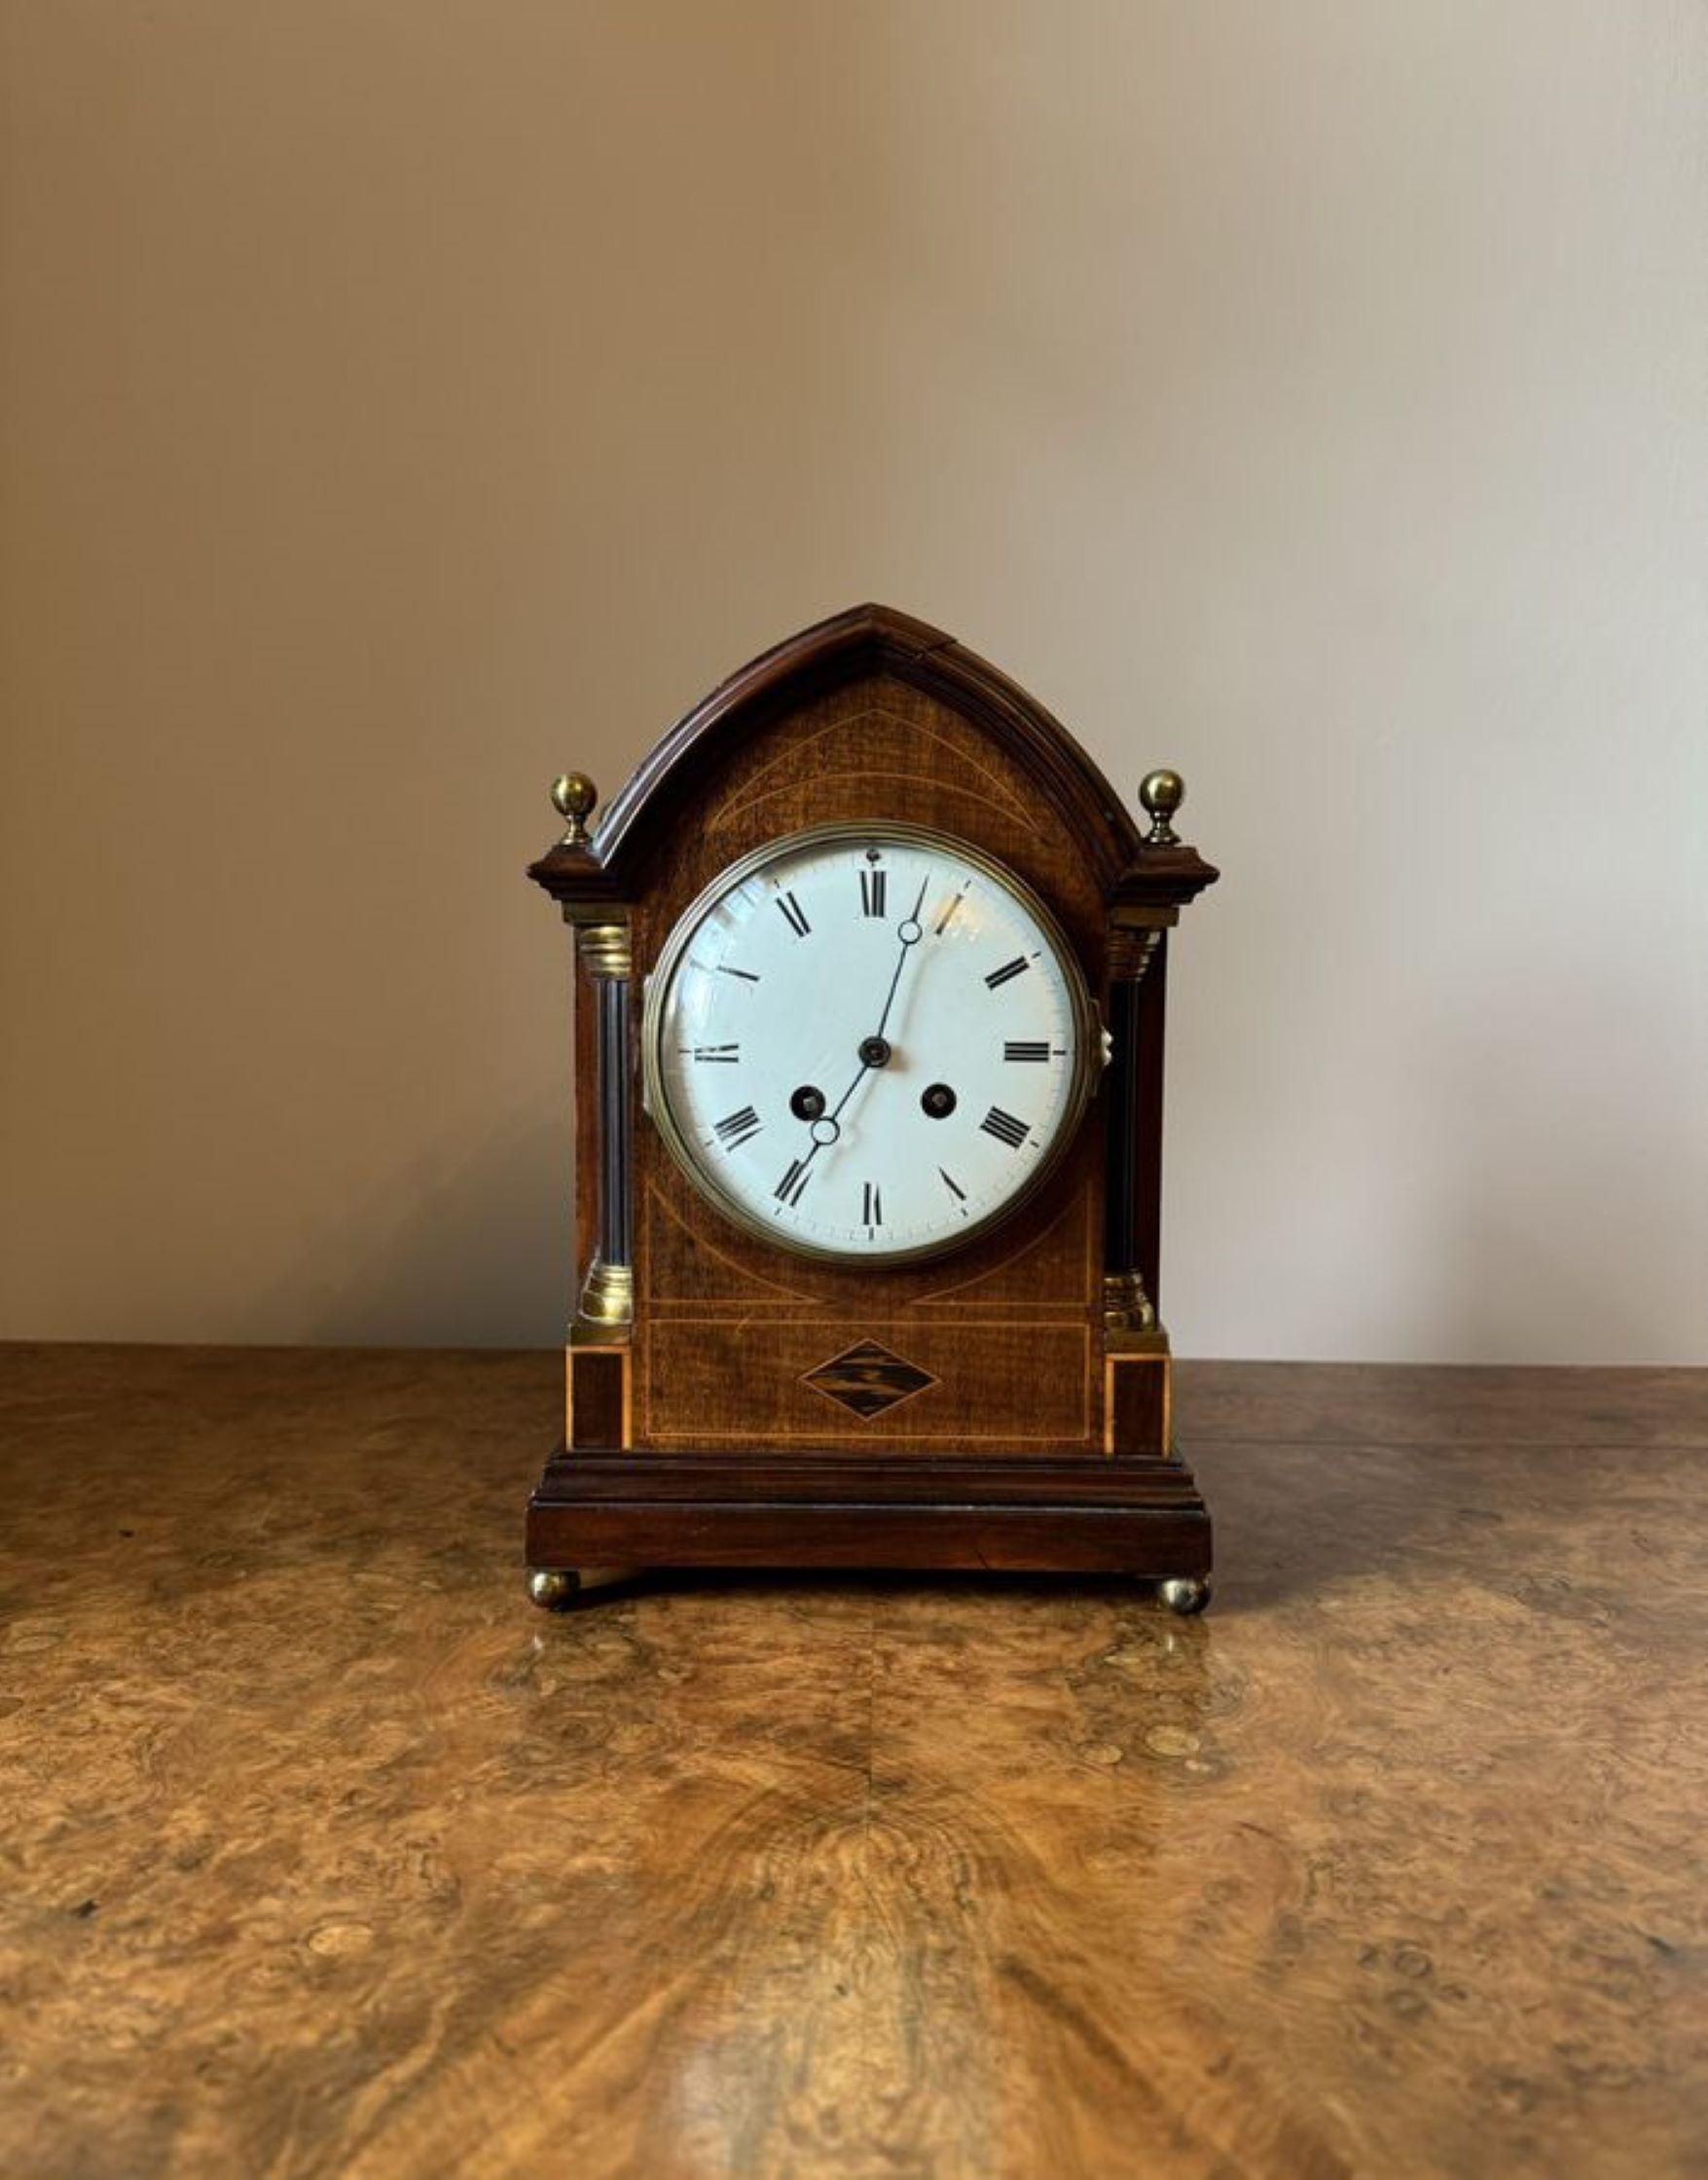 Quality antique Edwardian mahogany inlaid bracket clock, having a quality mahogany arched top case with satinwood inlay reeded columns with the original brass finales and original brass ball feet, having a circular porcelain dial with the original